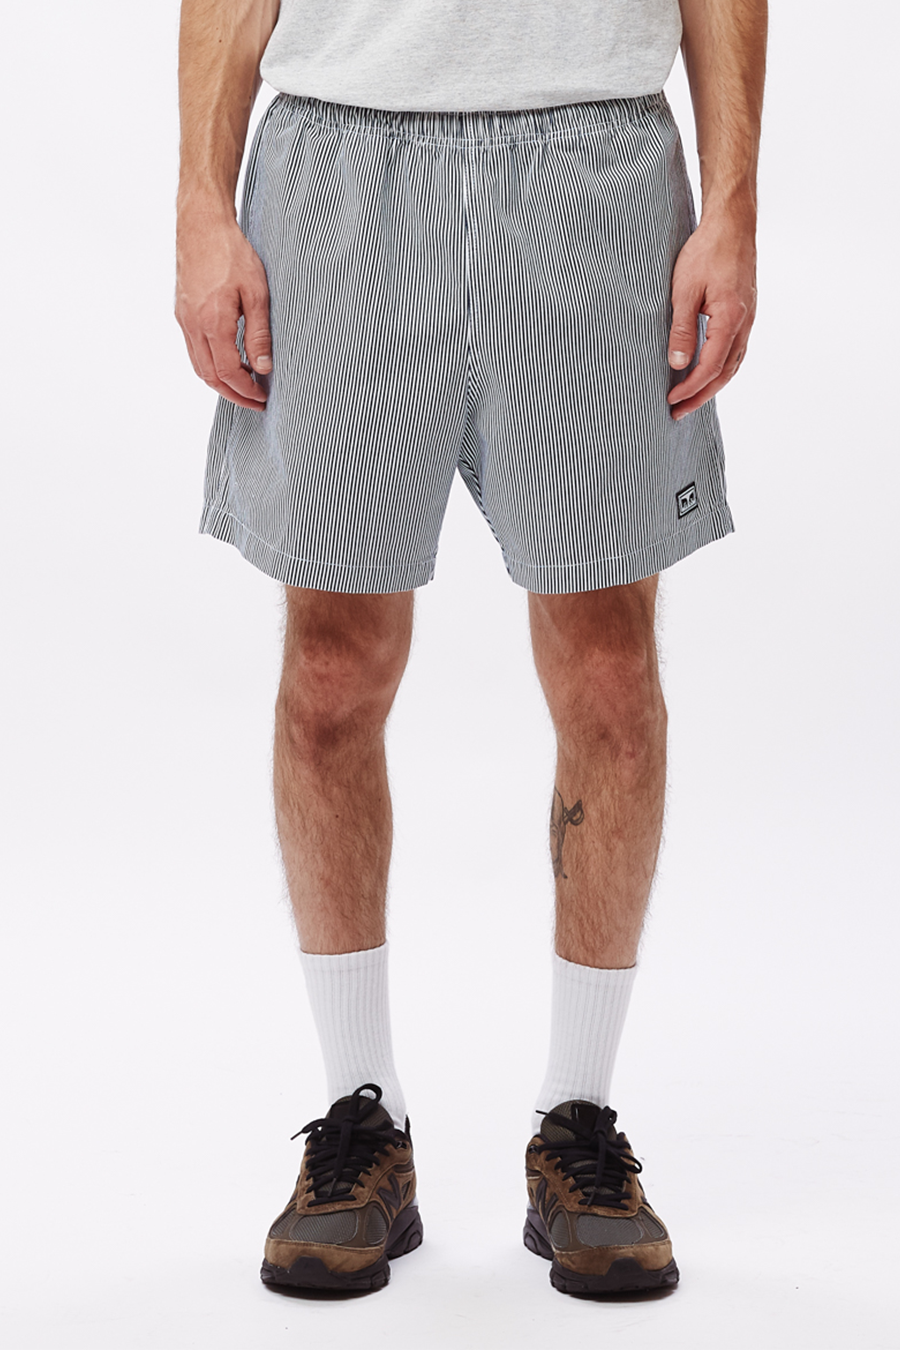 Easy Relaxed Twill Short | Navy Multi - Main Image Number 1 of 3